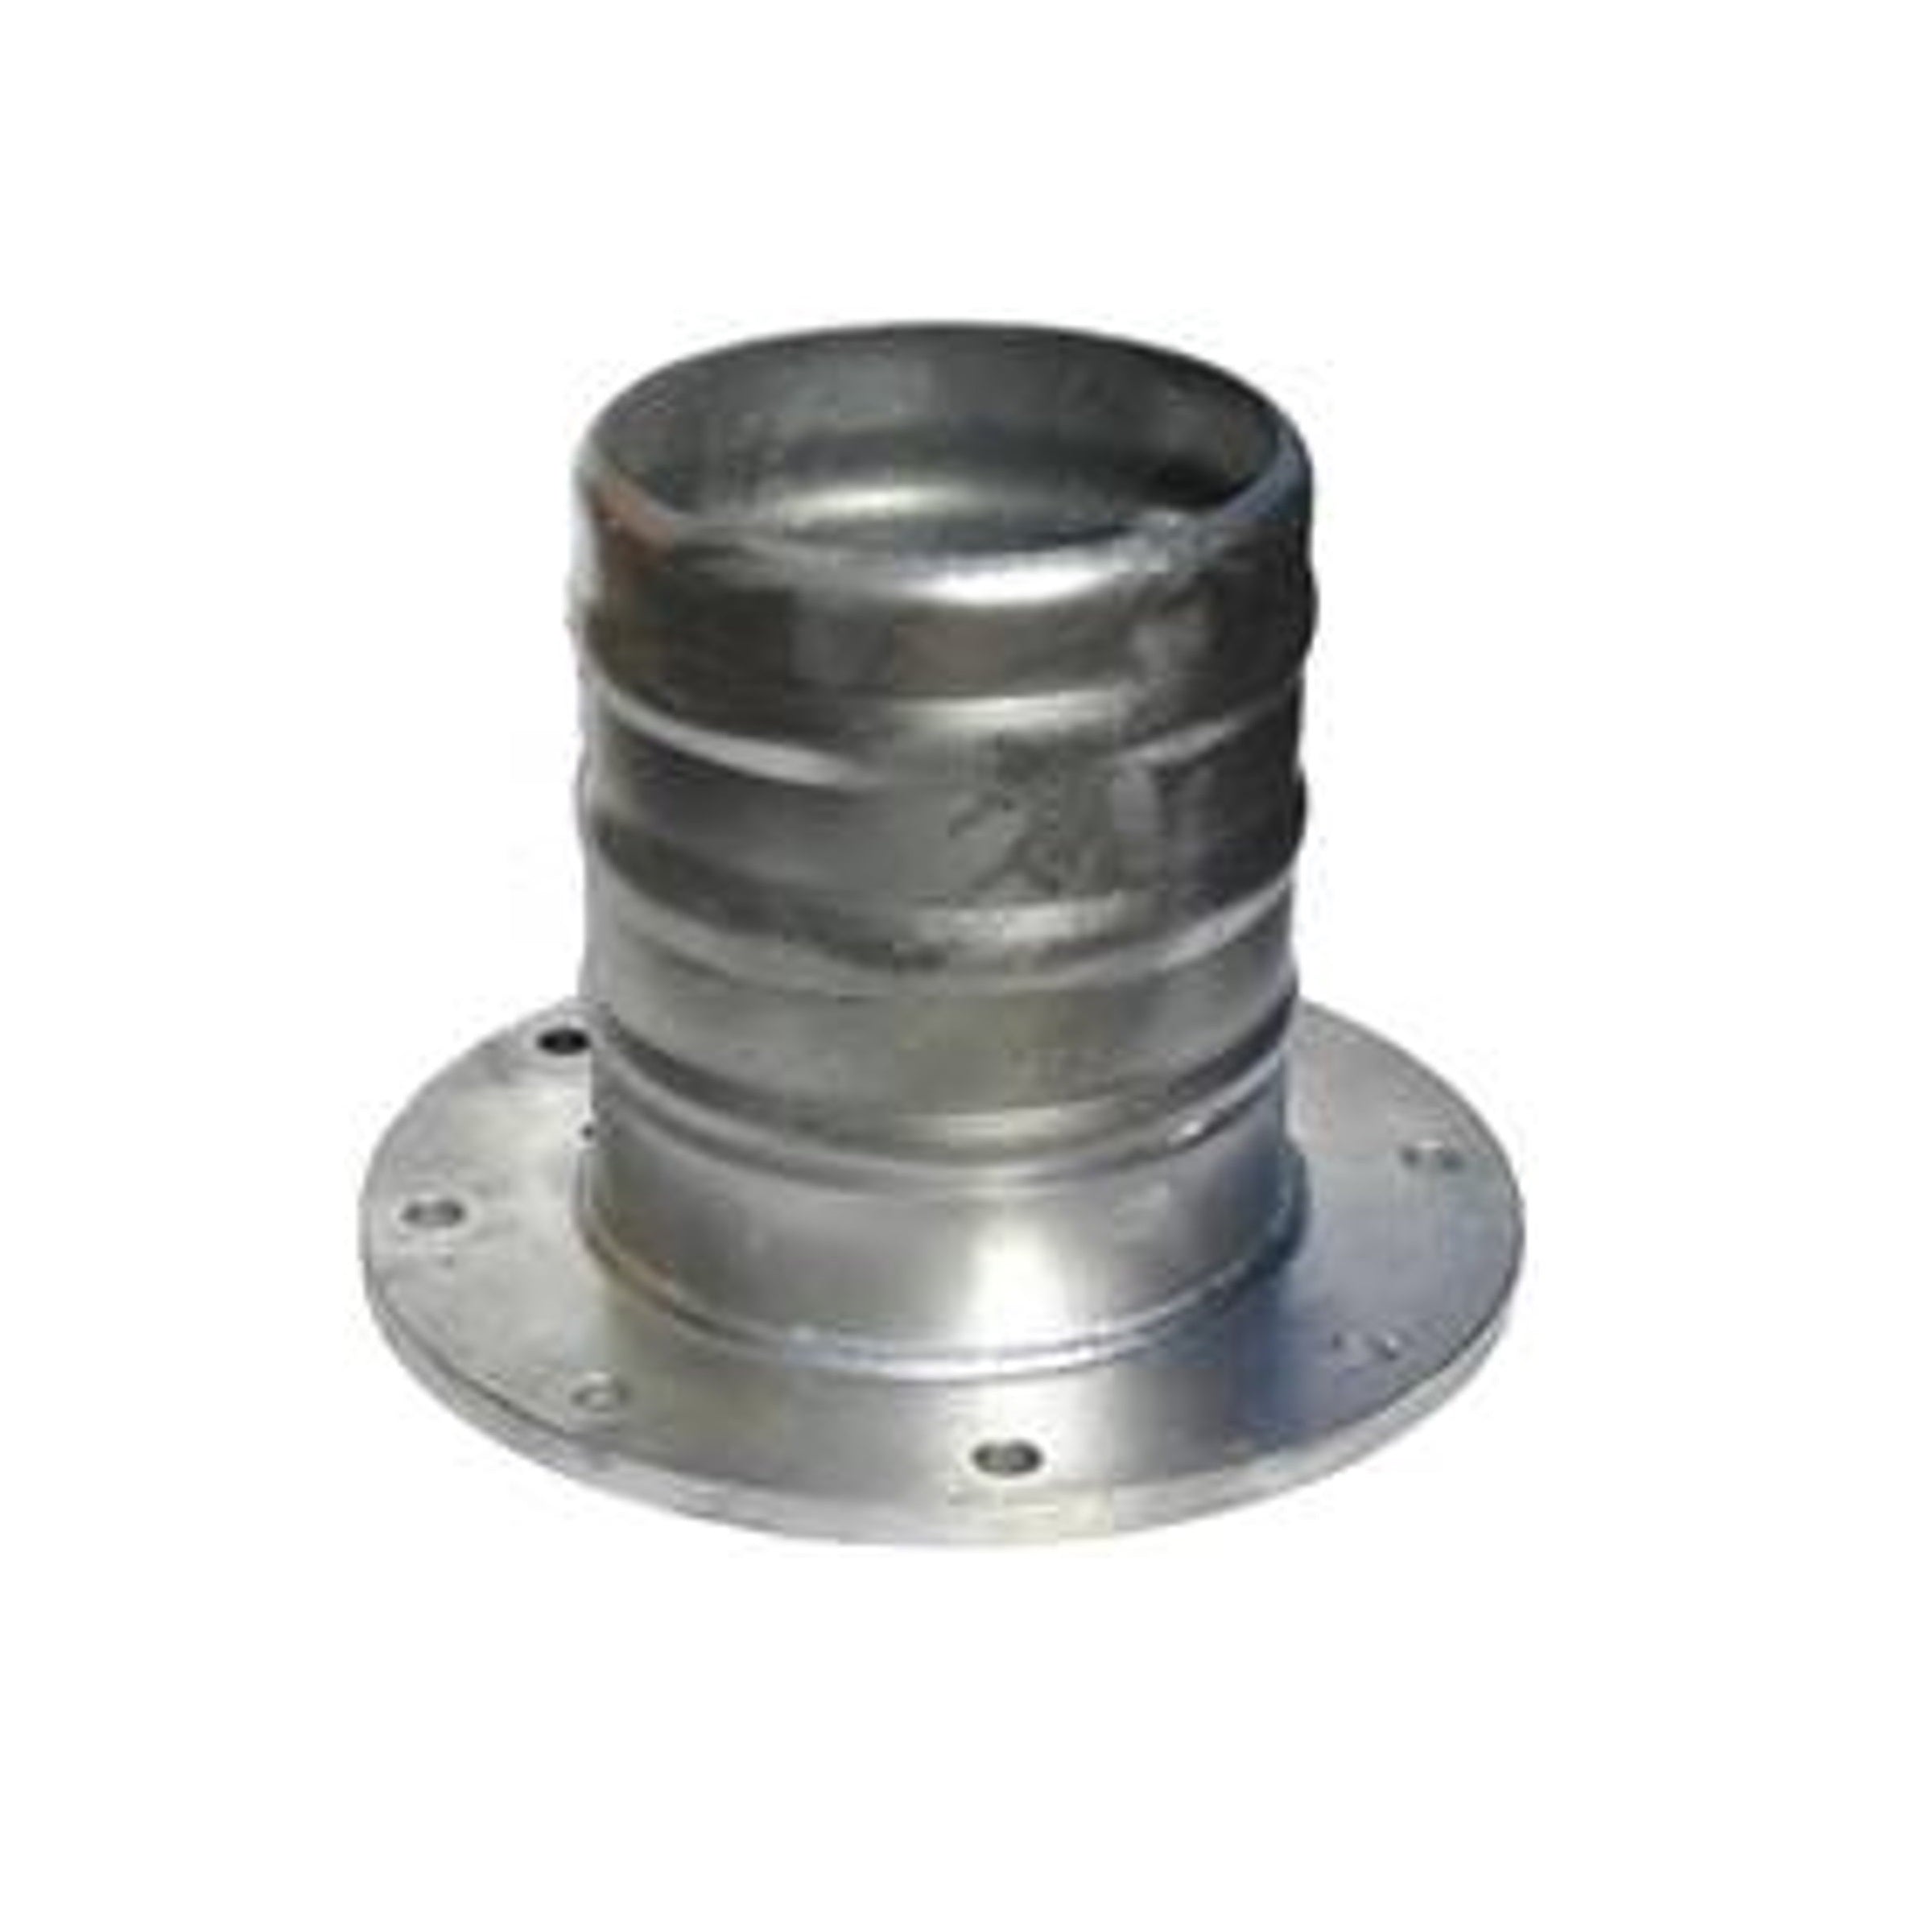 Galvanised hose tail to table D flange